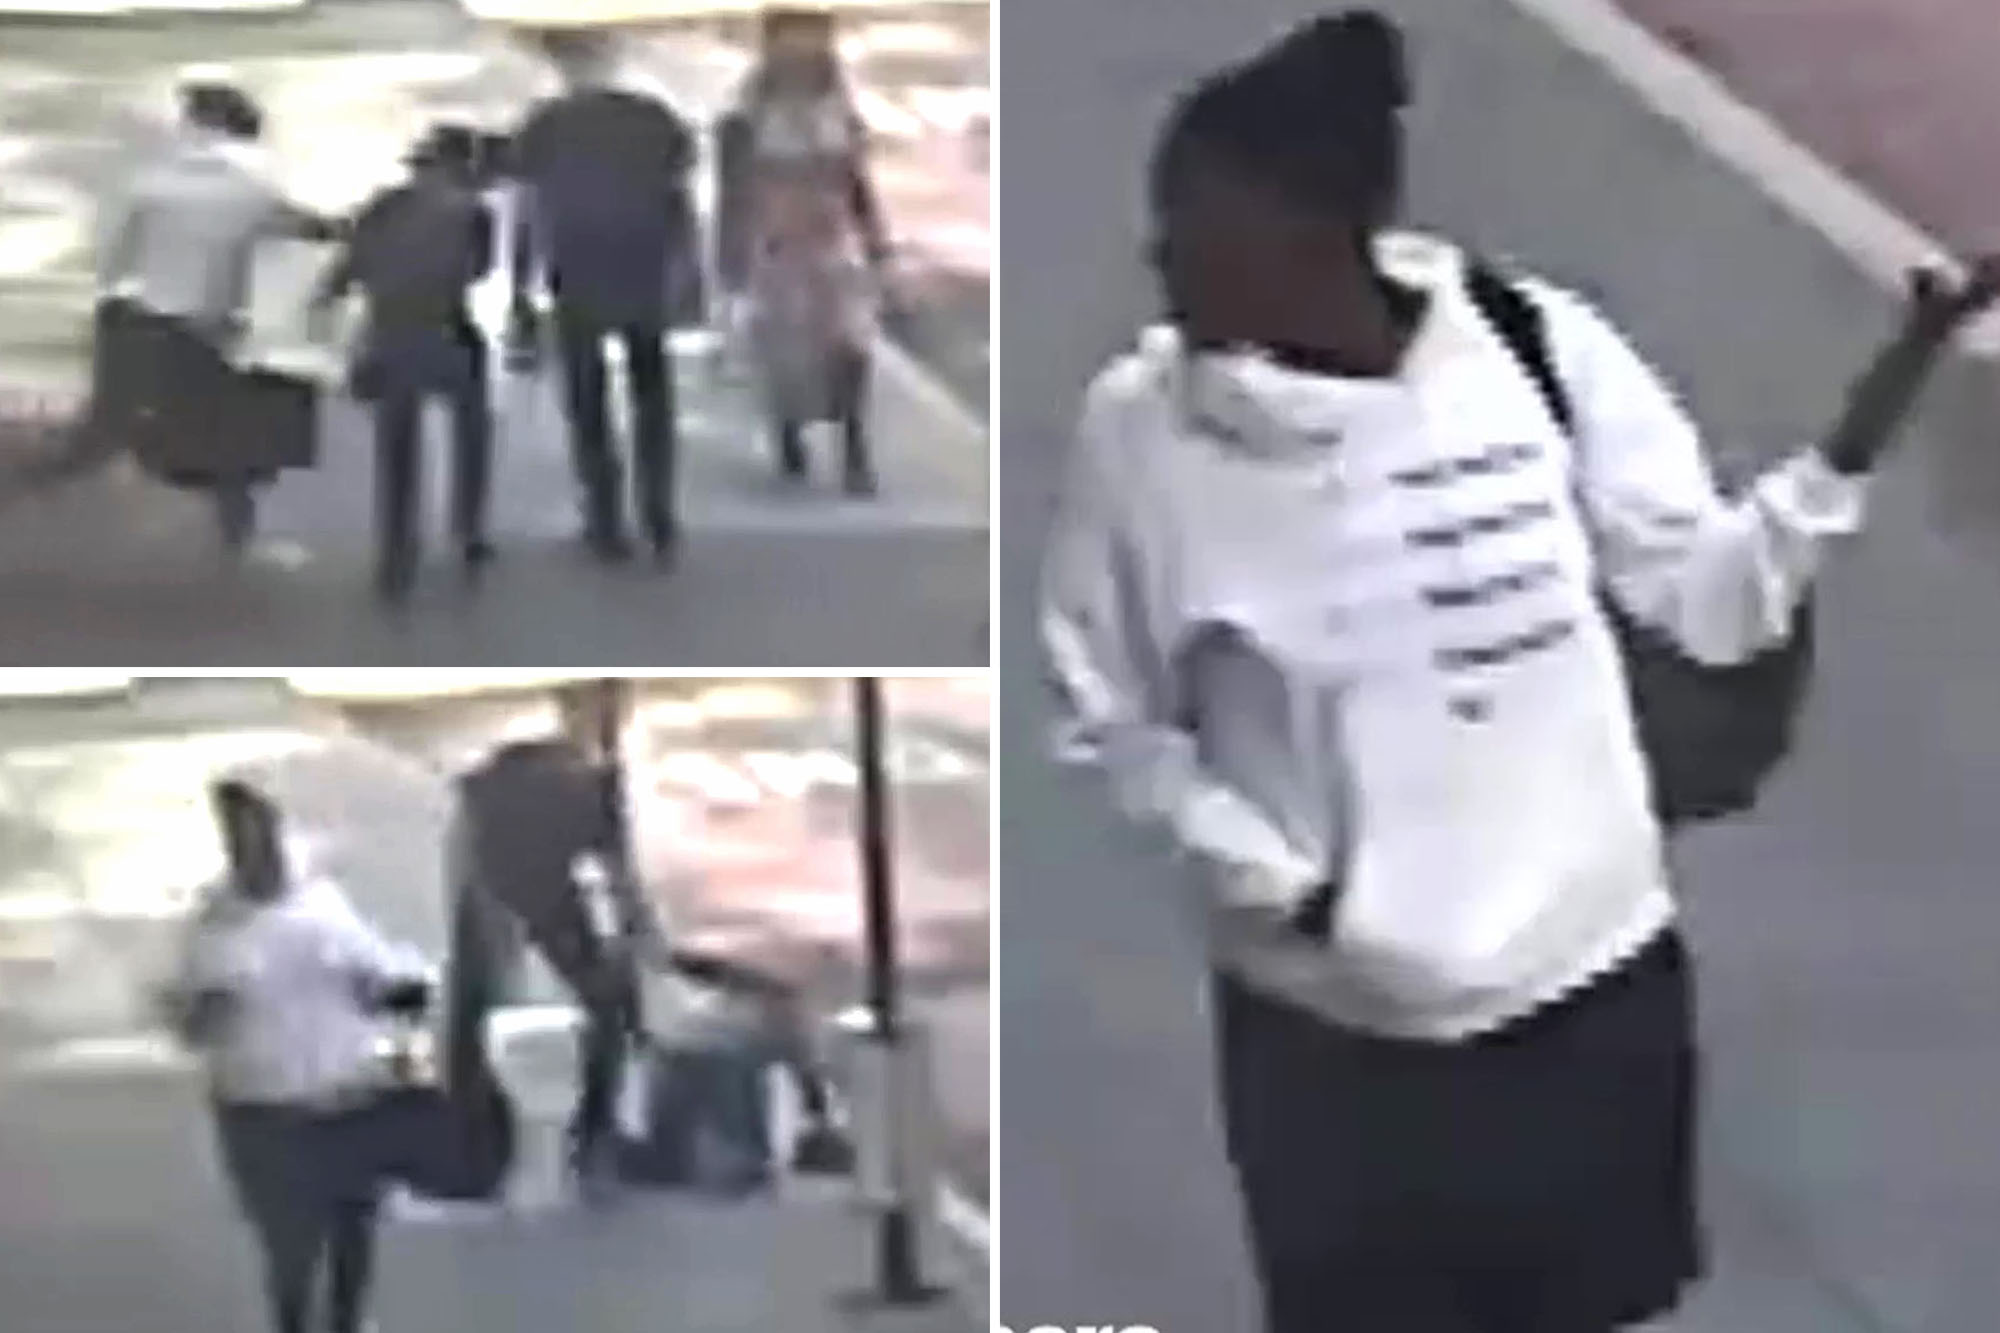 The 71-year-old victim was walking on Madison Avenue near East 52nd Street around 11 a.m. Wednesday when the stranger slugged her in the side of the face without saying a word, according to cops and the video.